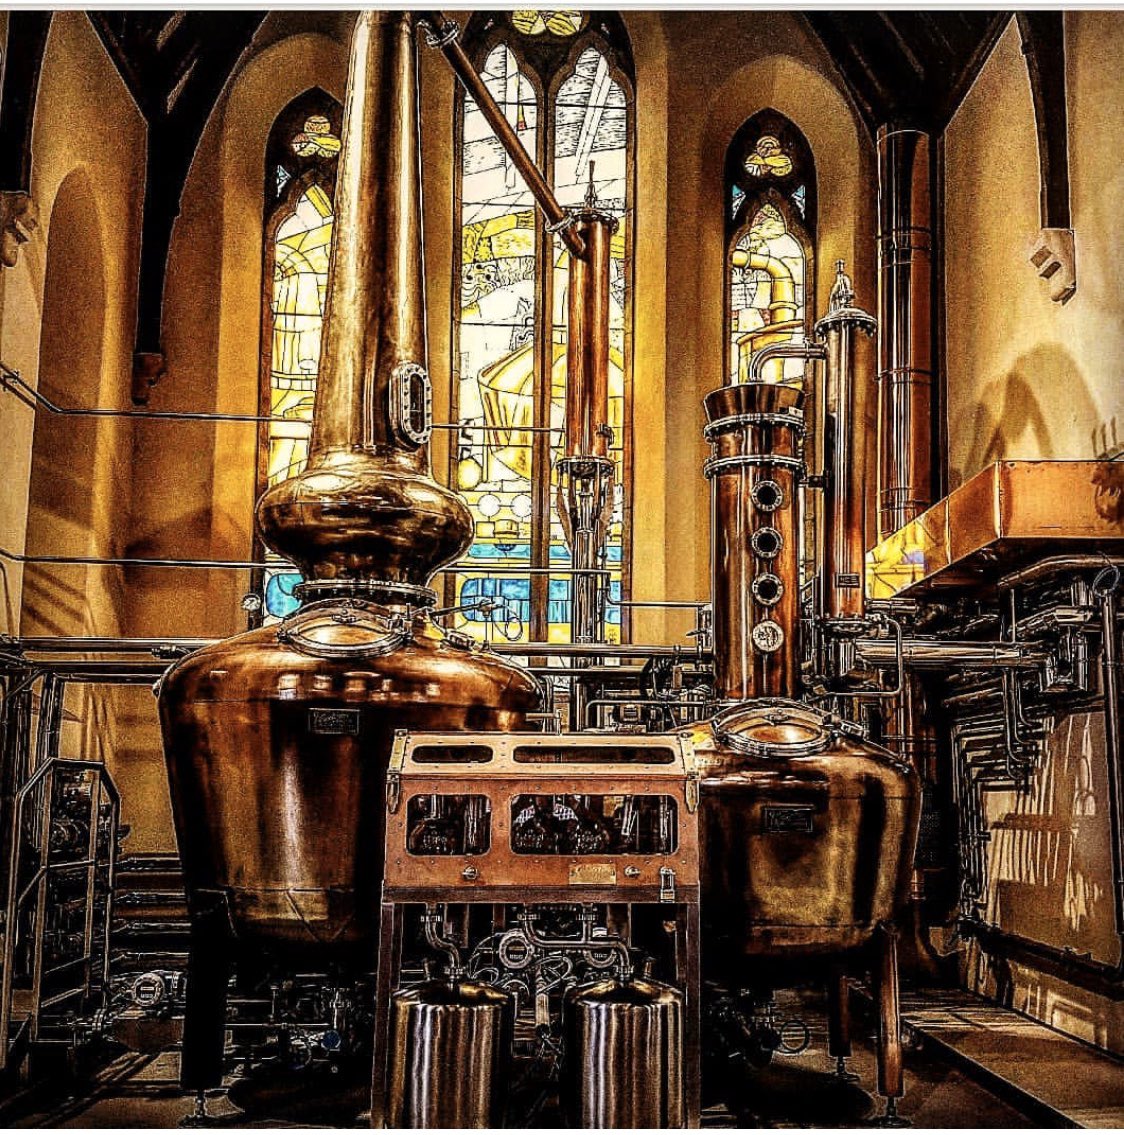 what could be more beautiful than a Vendome still in a church? Check out the Pearse-Lyons Distillery in Dublin Ireland. #pearselyonsdistillery #vendome #irishwhiskey #whiskysnobsoflowermoco